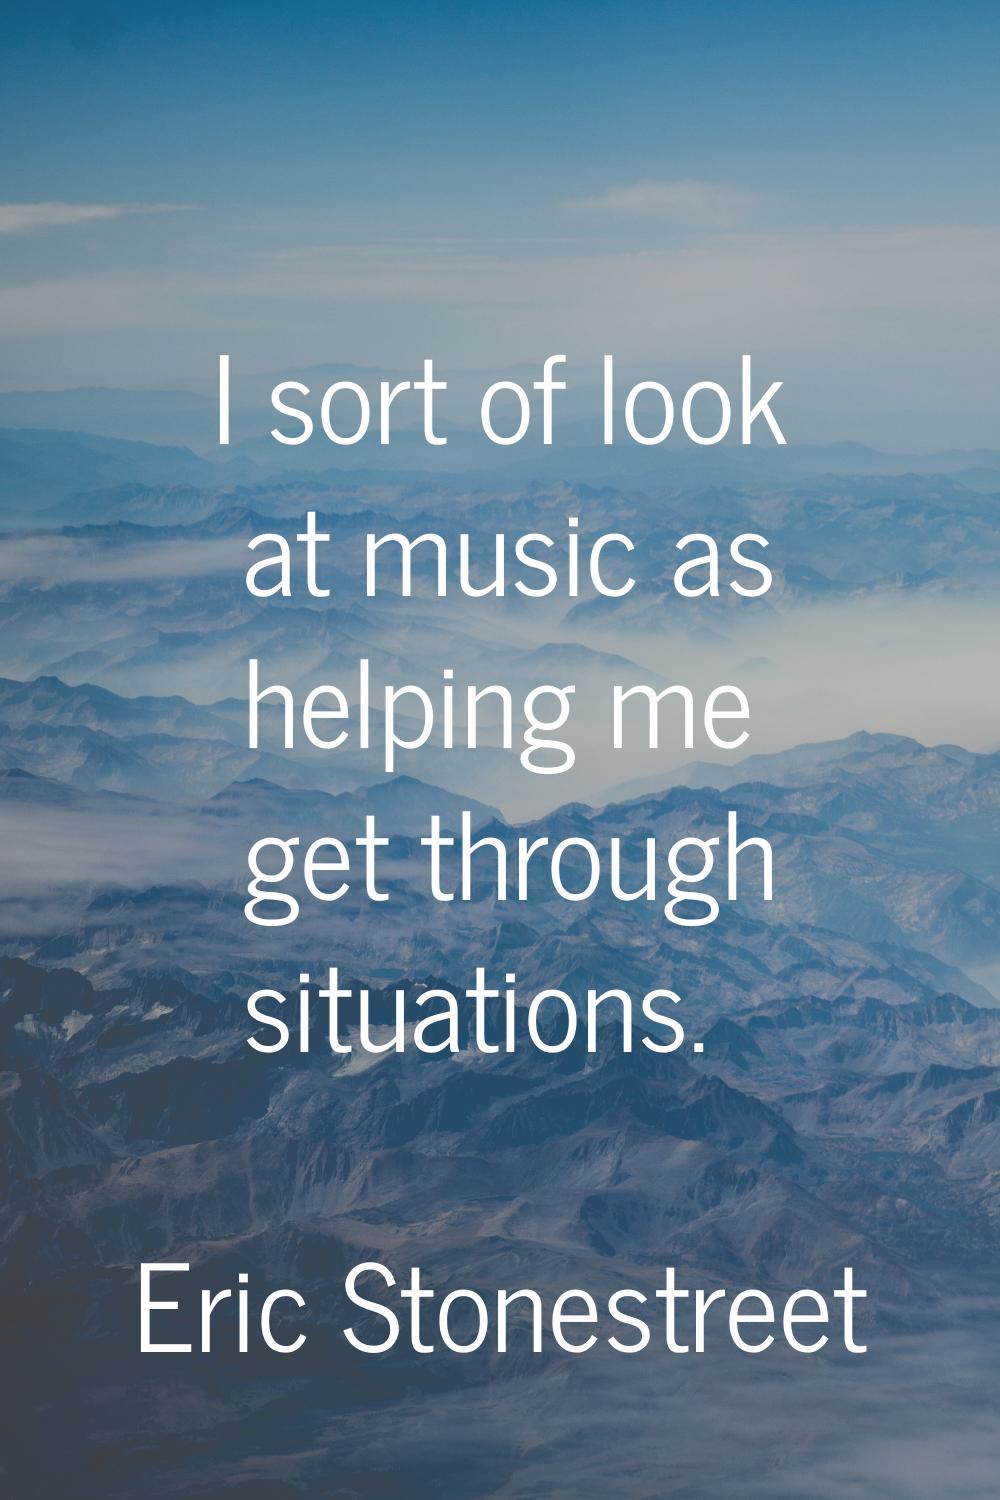 I sort of look at music as helping me get through situations.